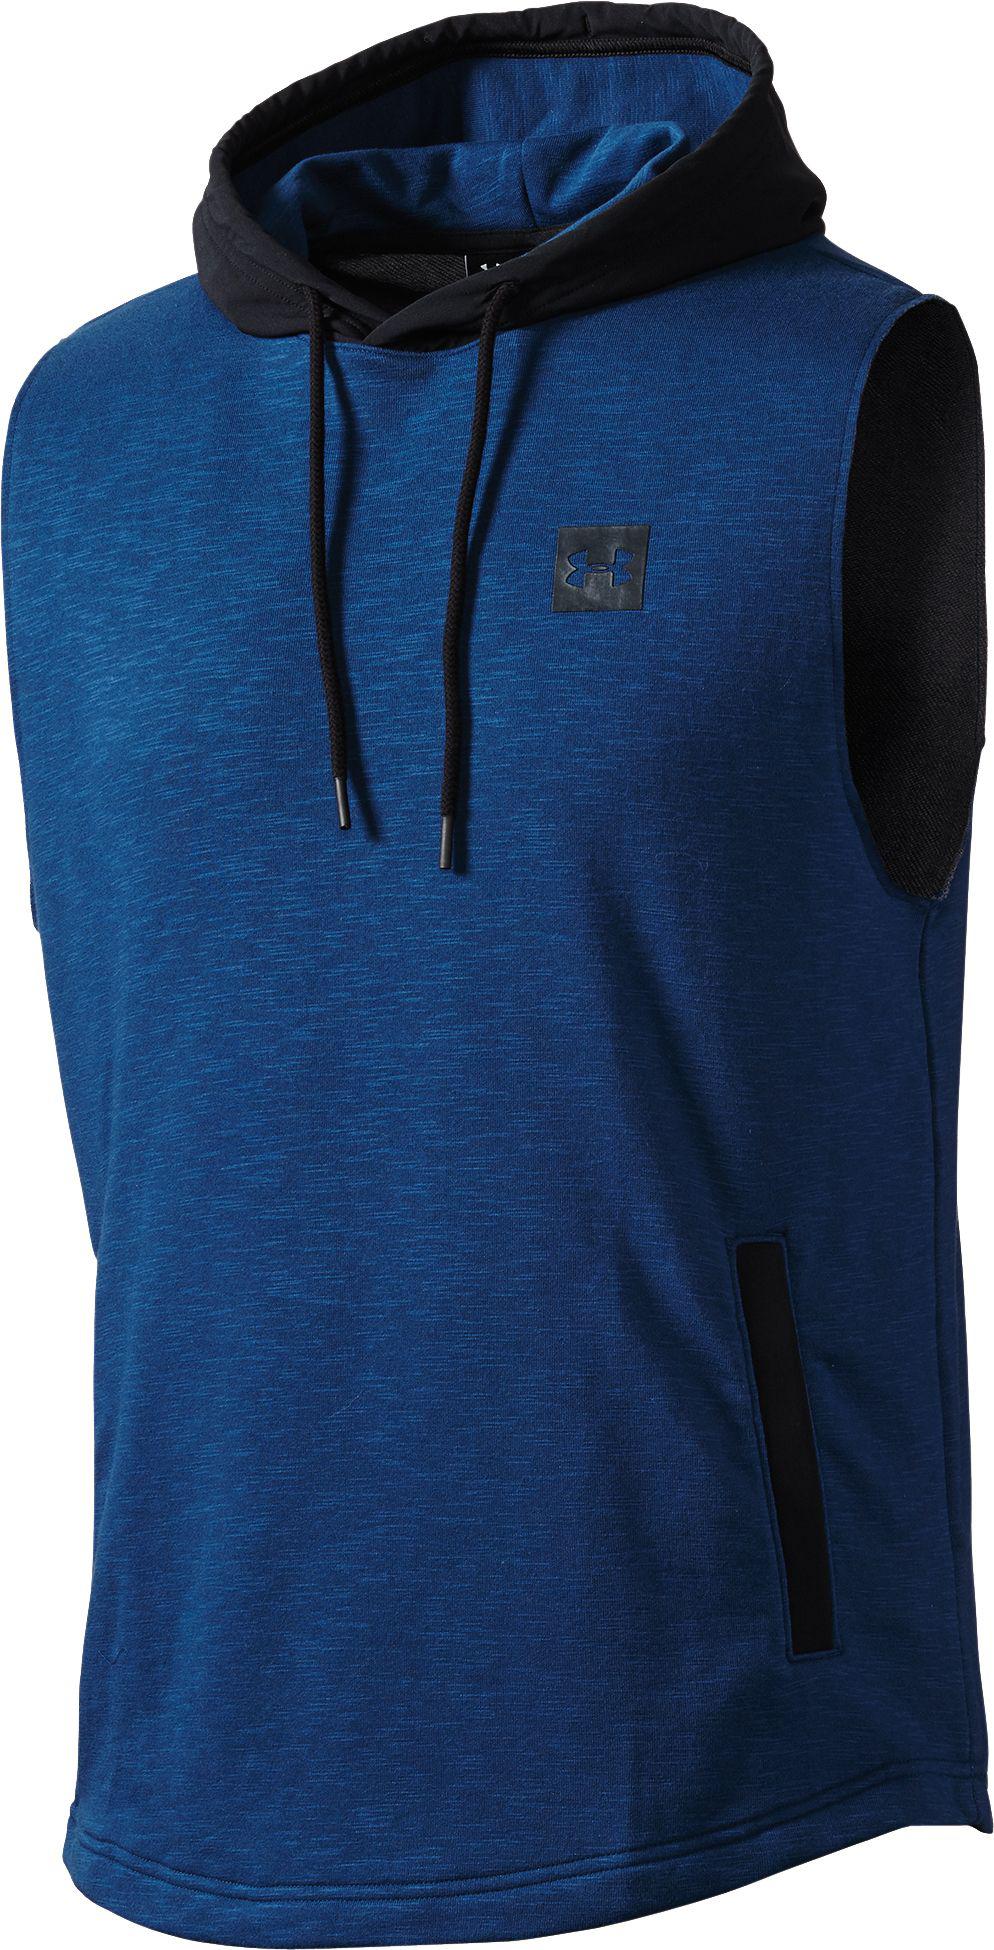 Lyst - Under Armour Sportstyle Sleeveless Hoodie in Blue for Men